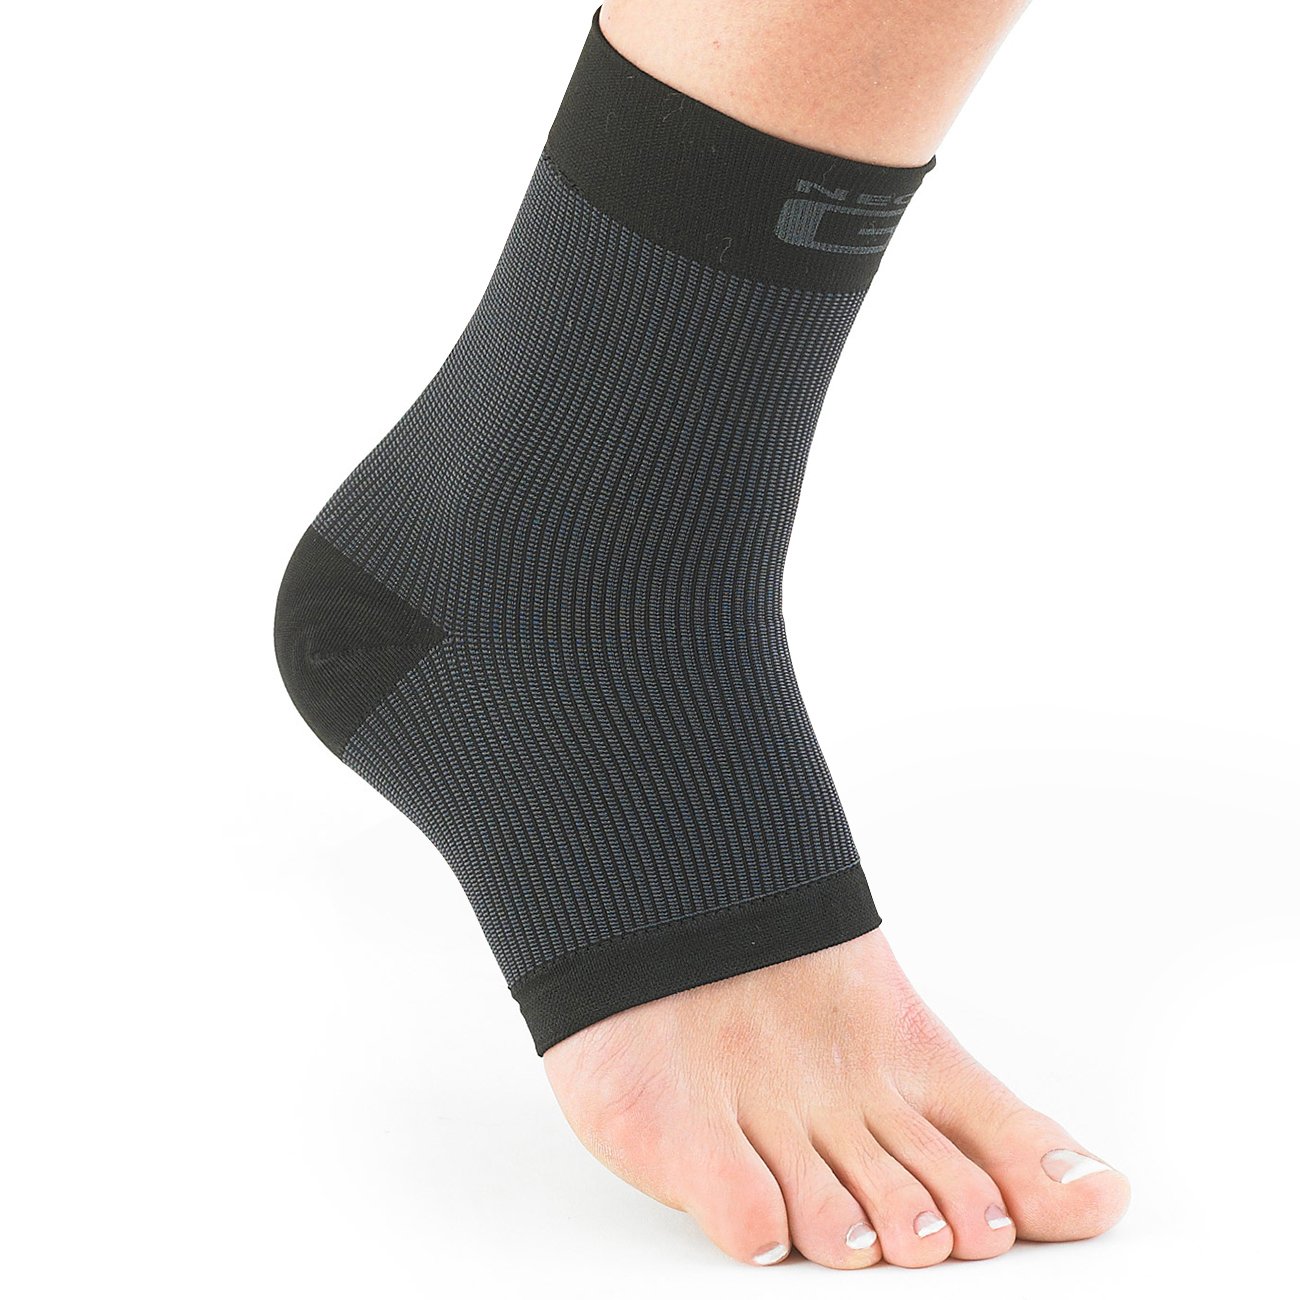 Neo G Airflow Ankle Support - Large